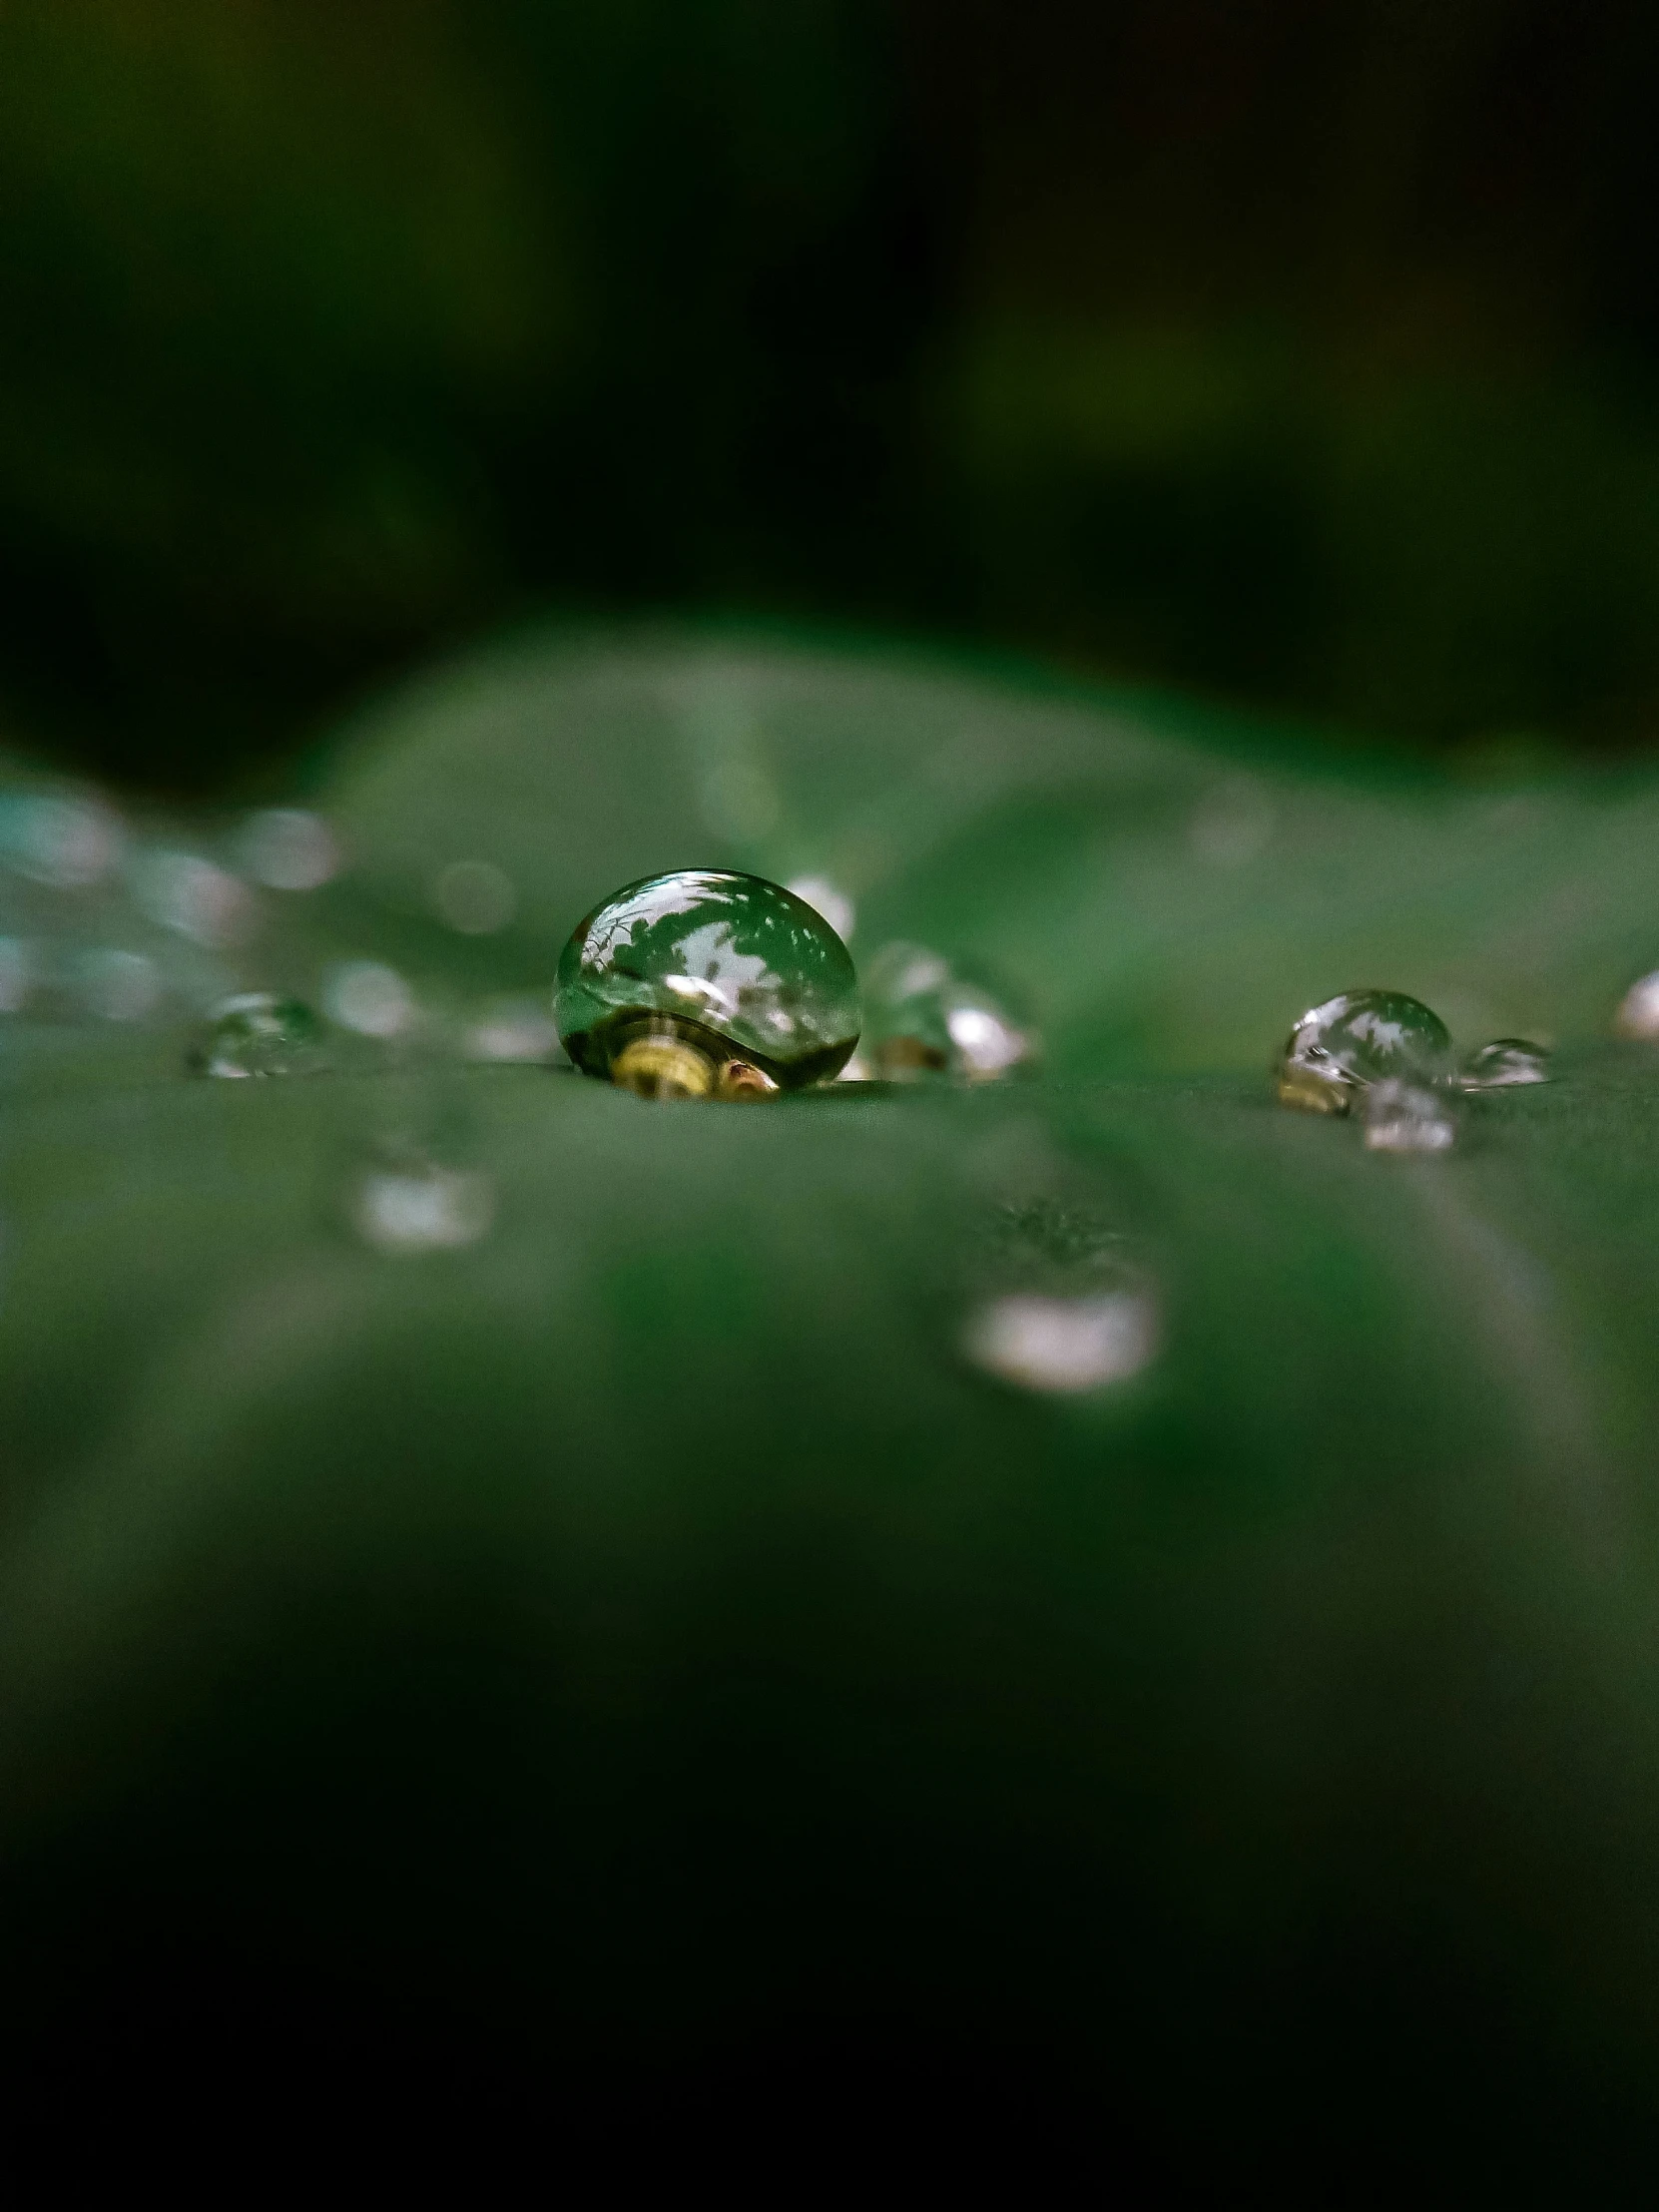 a close up view of a drop of water on a plant